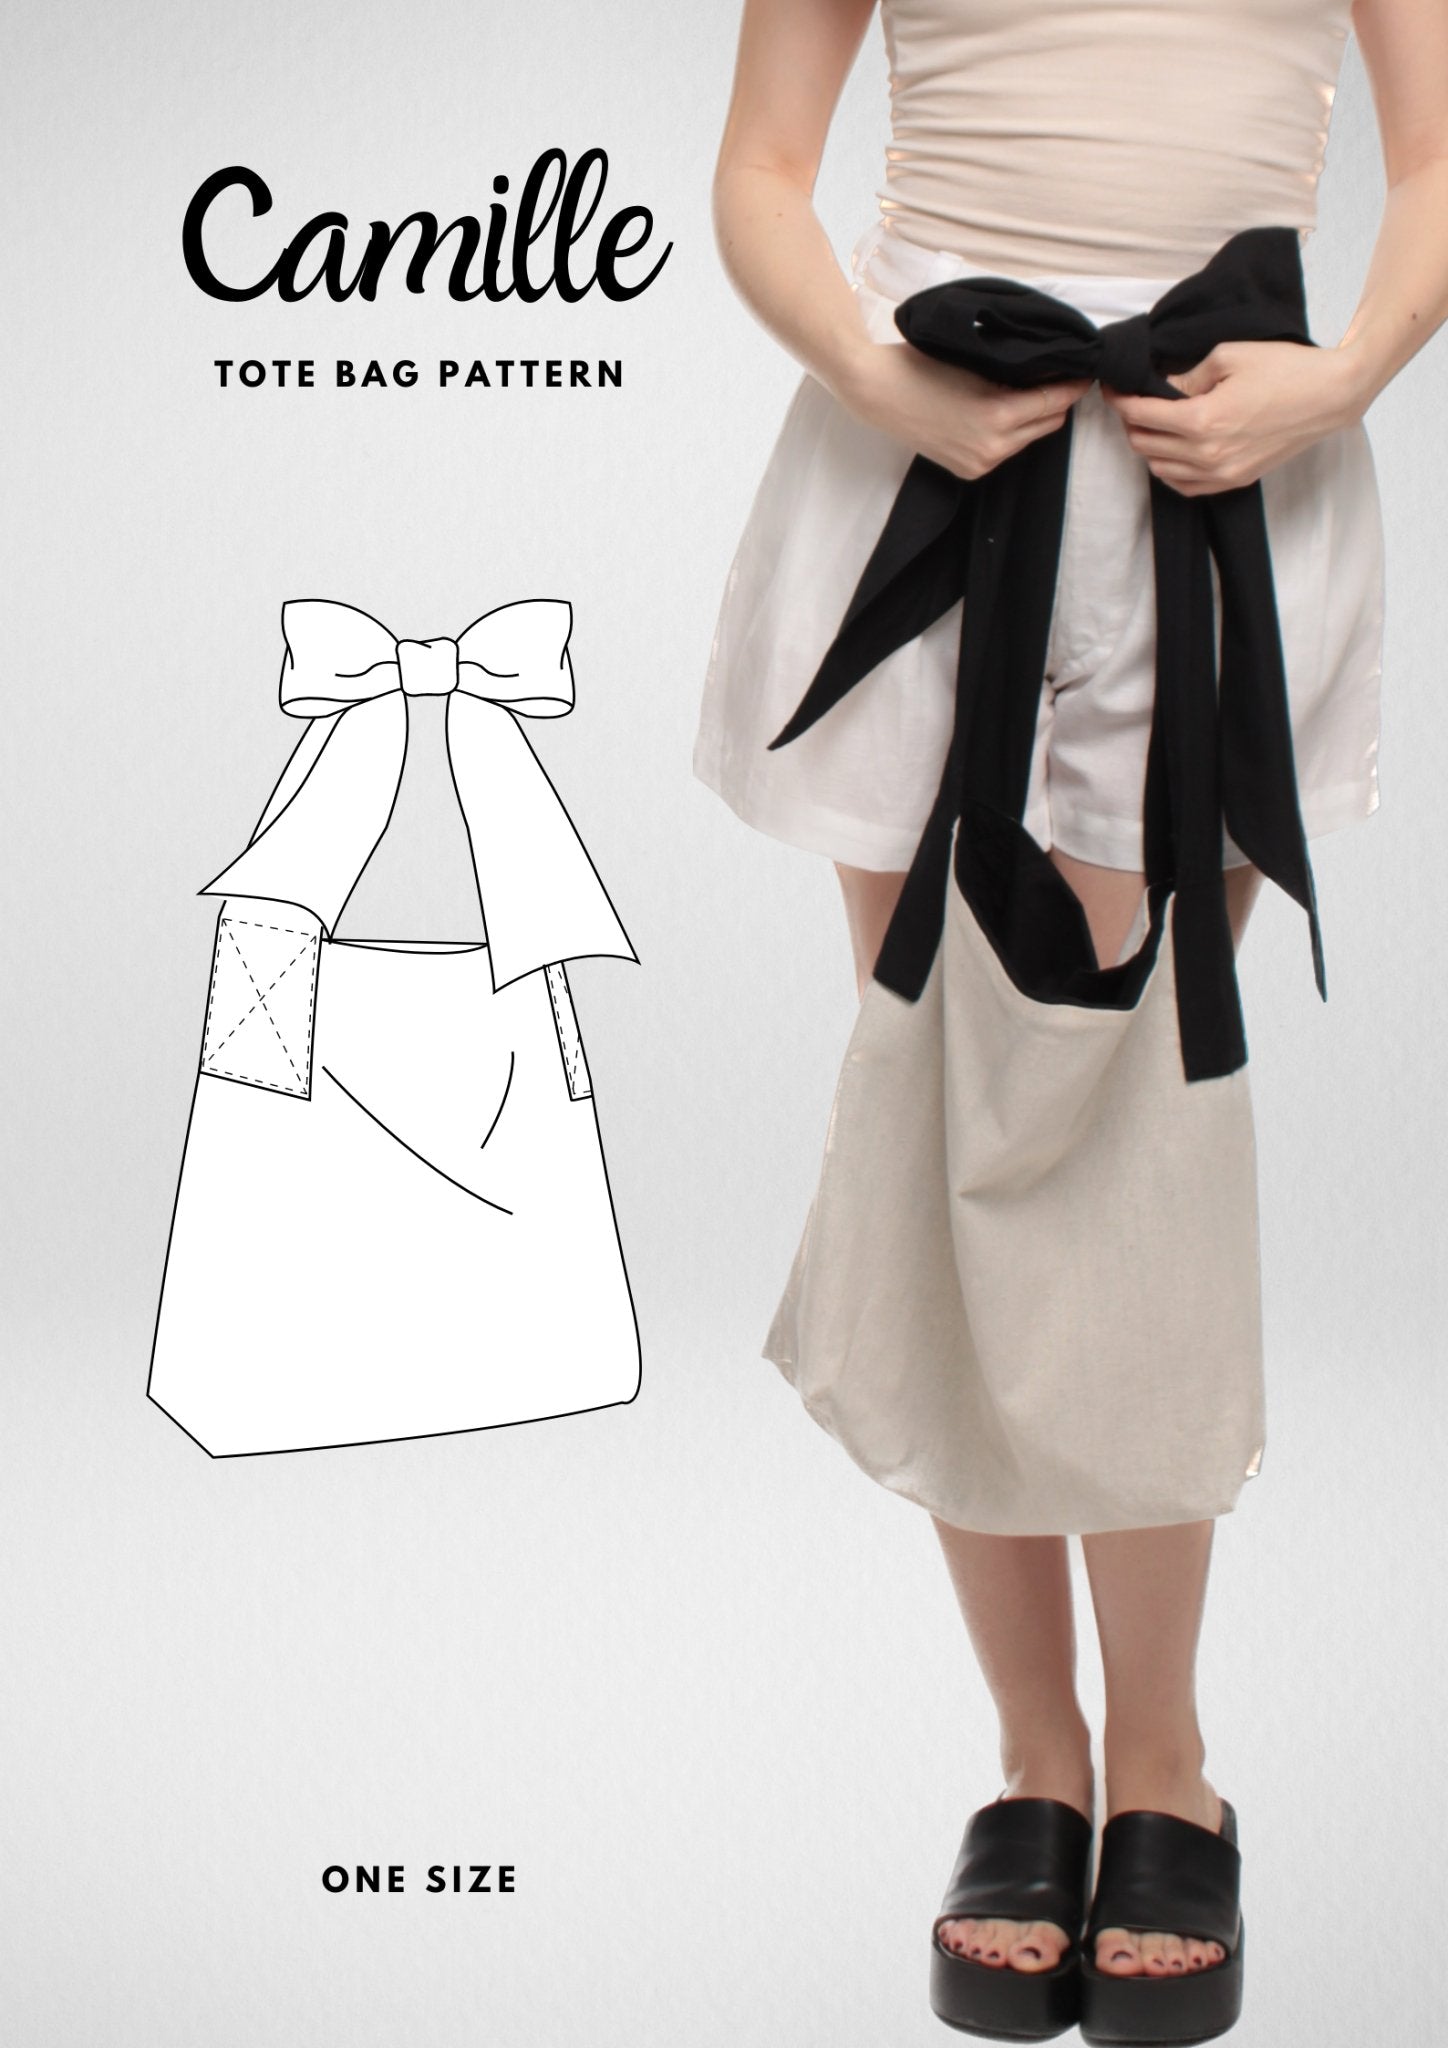 Cute Tote Bag with Bow Sewing Pattern [Camille] - Friedlies